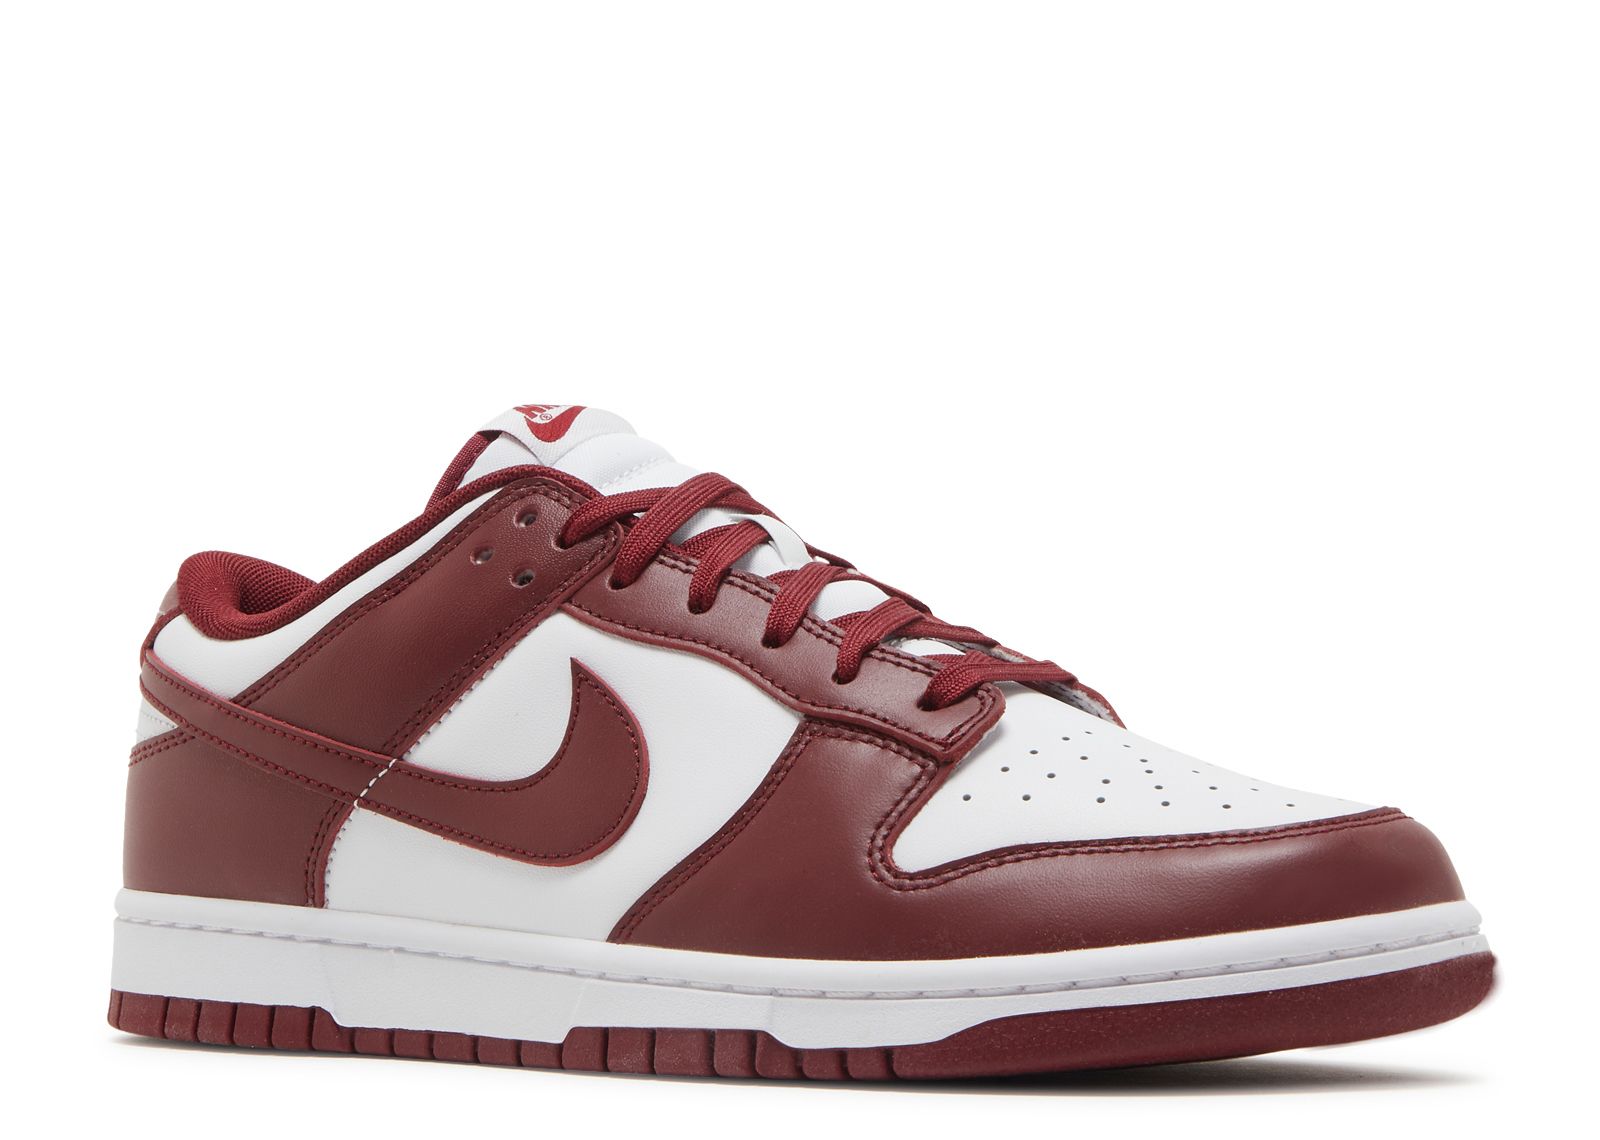 Dunk Low 'Team Red' - Nike - DD1391 601 - team red/team red/white